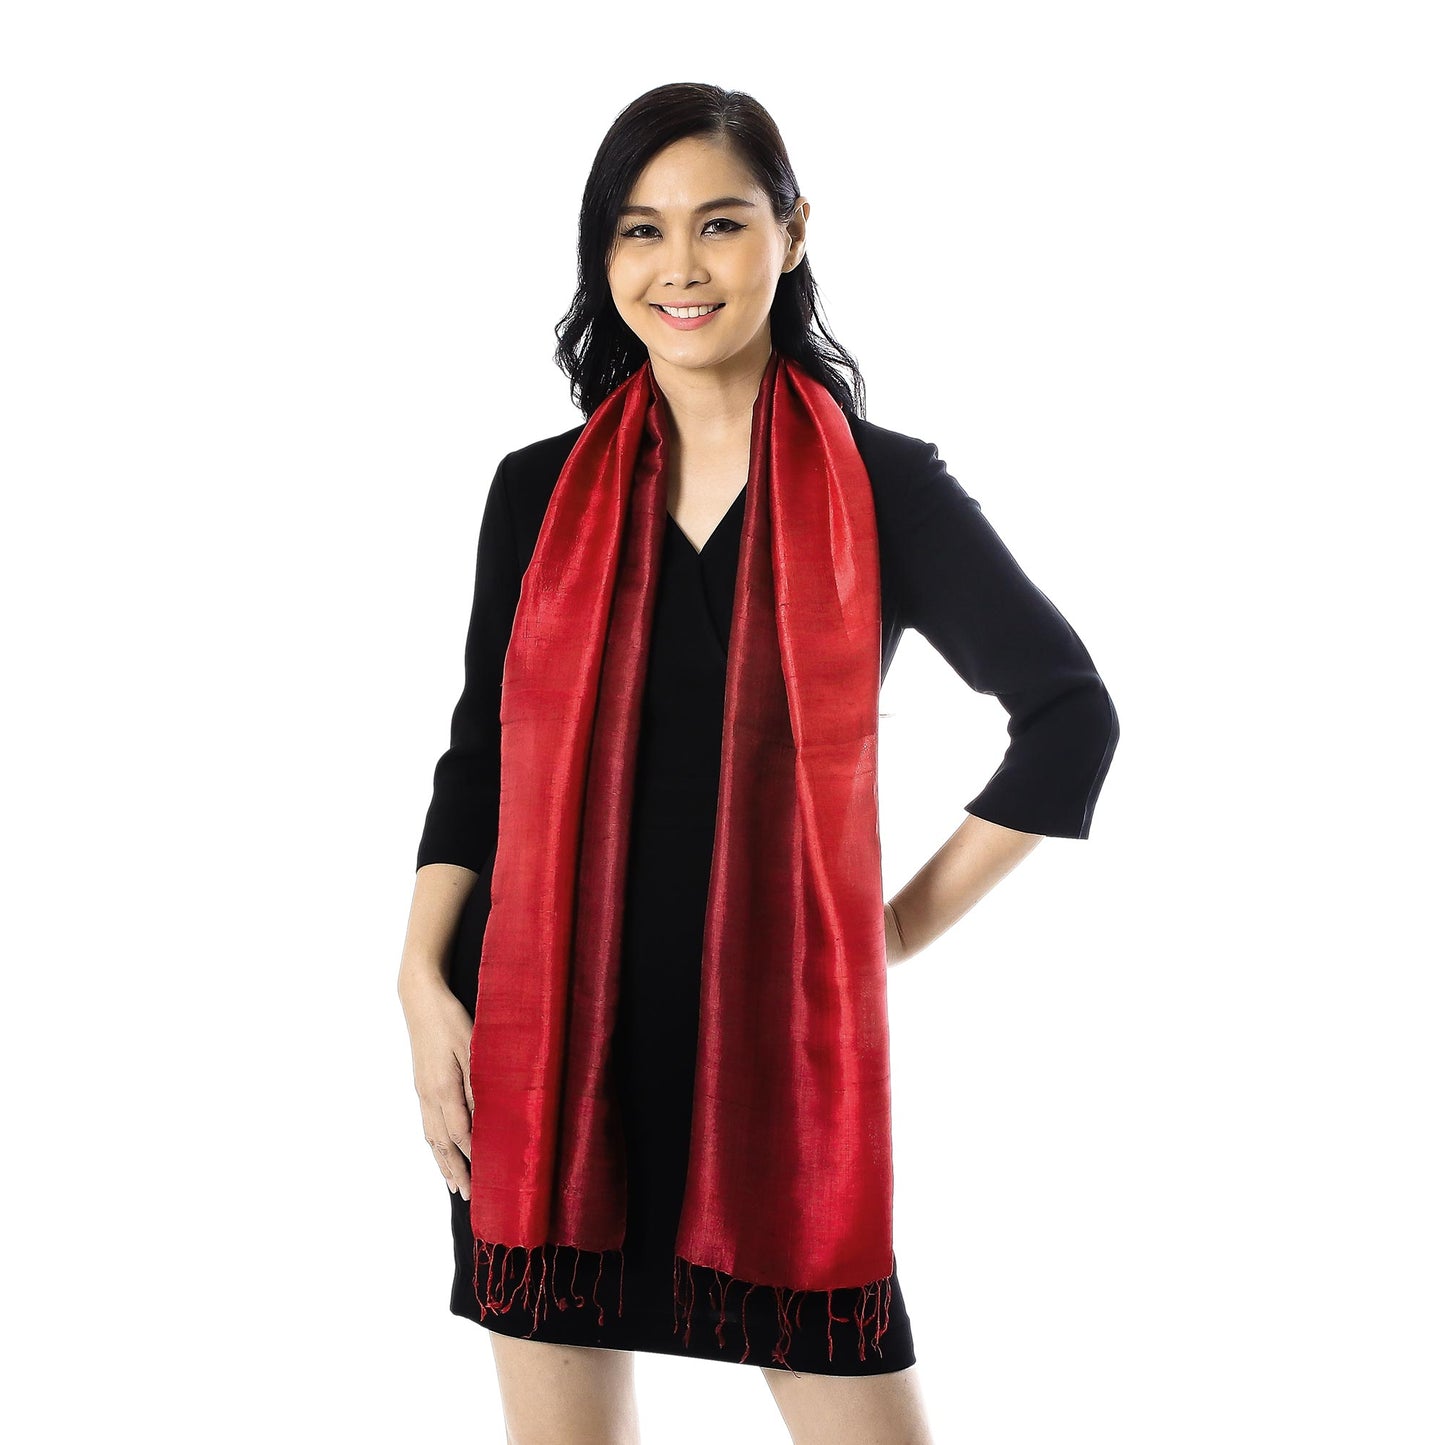 Ruby Love Ruby Red Tie-Dyed Handwoven Silk Scarf with Fringe